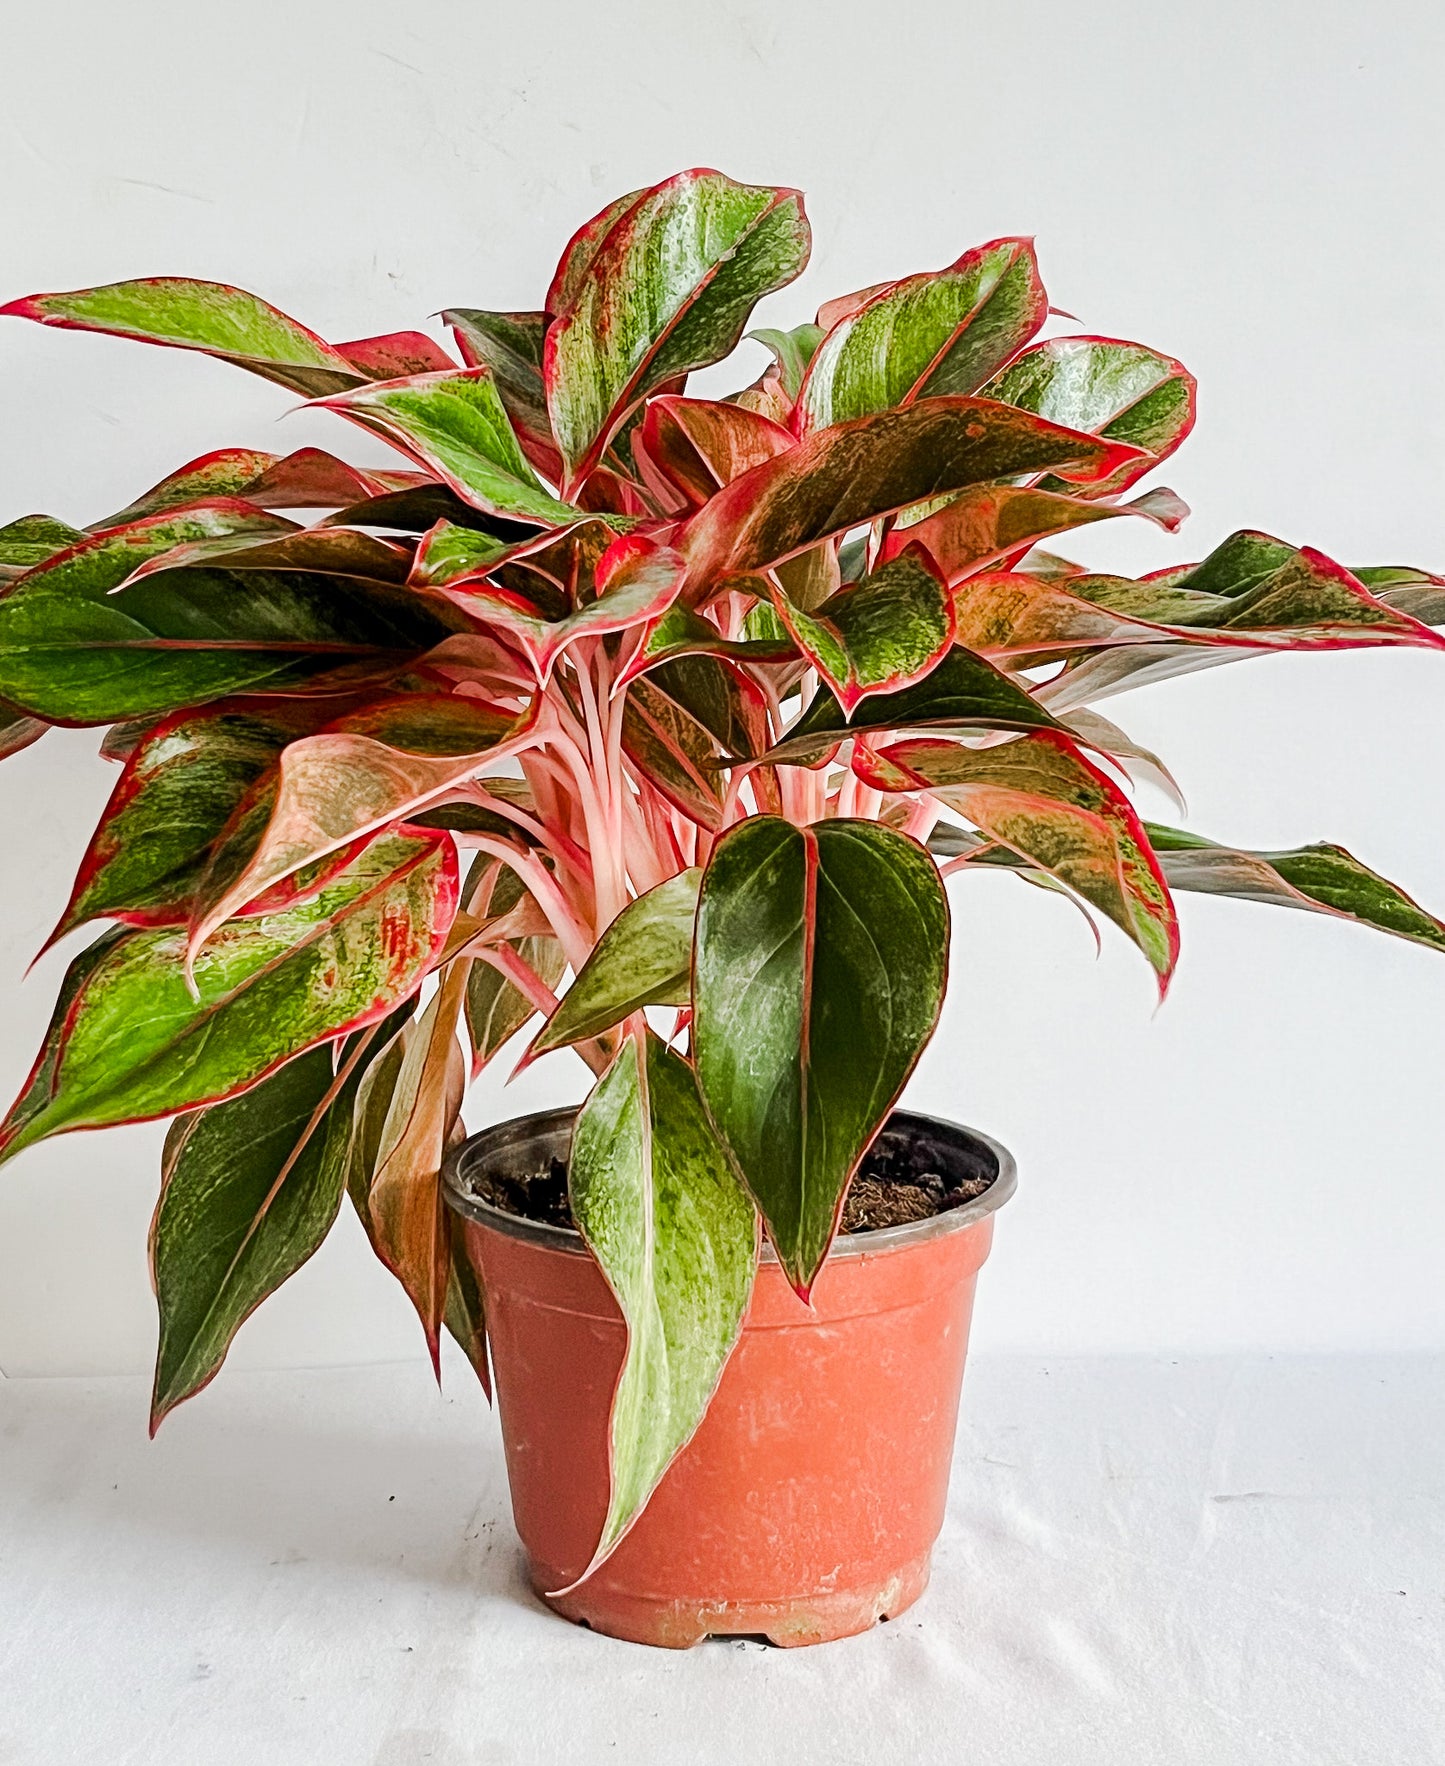 Aglaonema 'Red Siam Auora' - Chinese Evergreen Plant- Low Light & Drought Tolerant, Beginner Friendly Plant With Colorful Leaves - Tropical Houseplant (4" or 6" Pot)